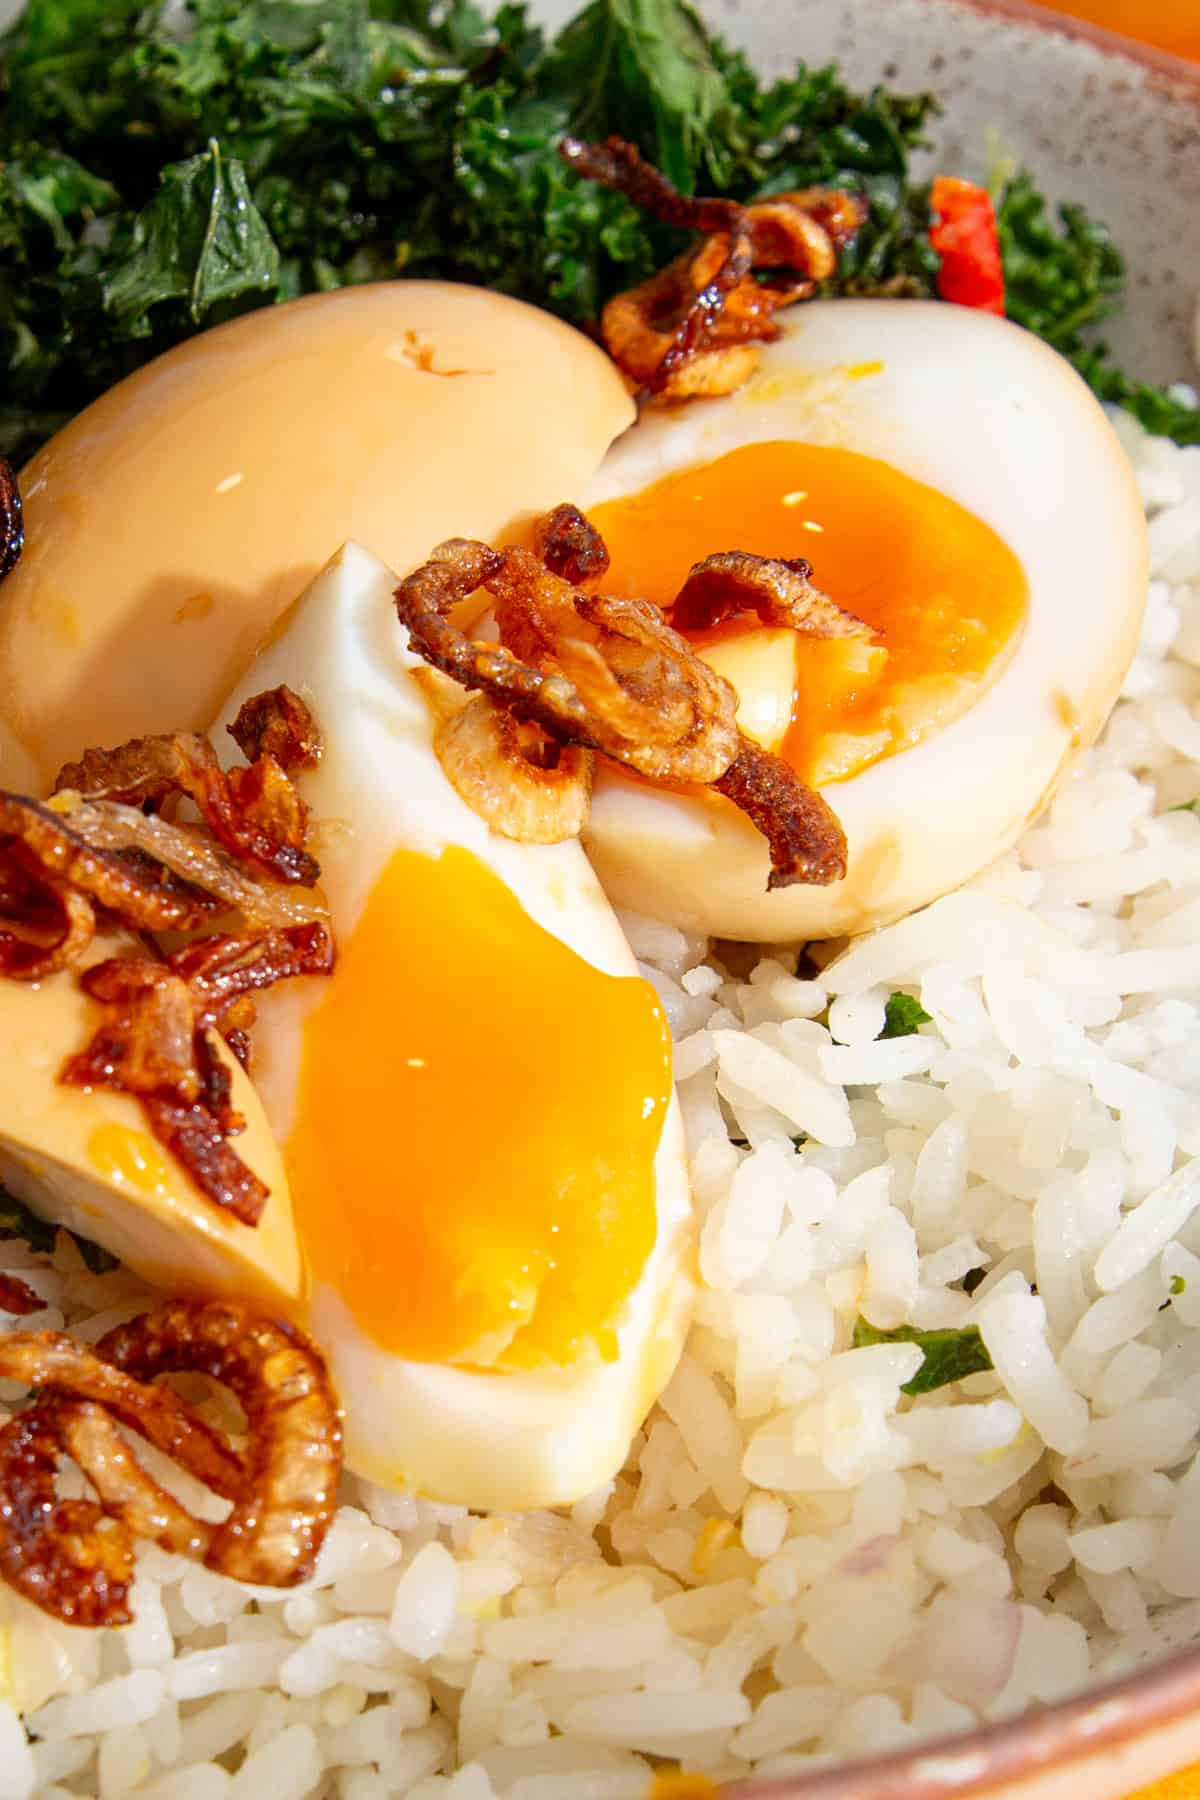 Eggs with soft yolks cut in quarters over rice with kale and roasted onions with chilli oil.